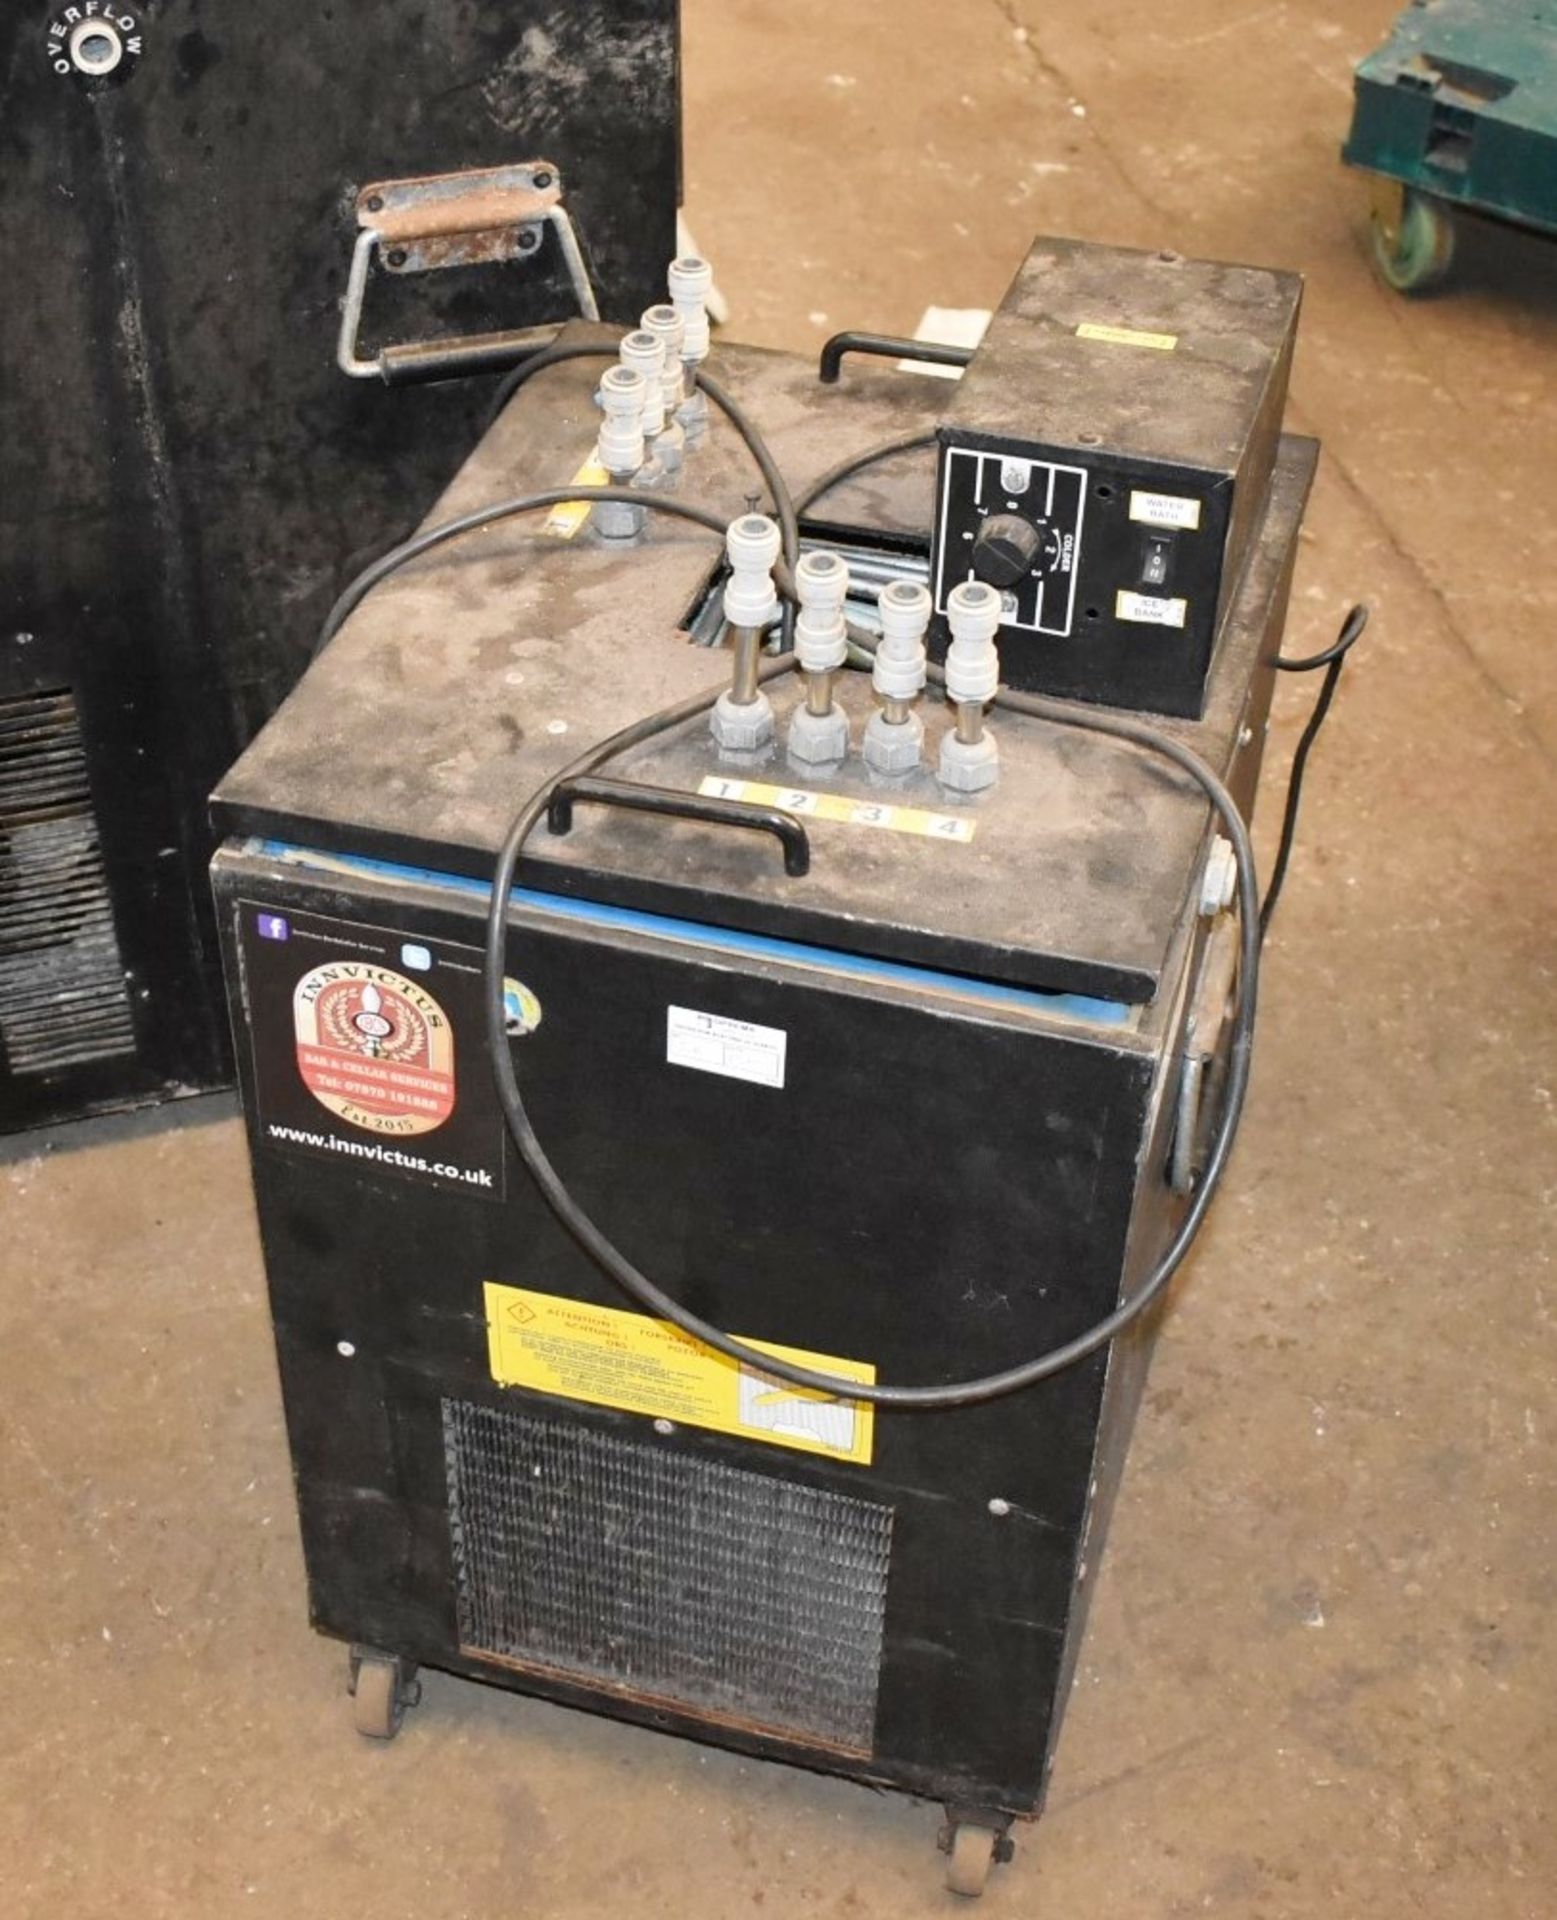 3 x Remote Beer Coolers - Used - Includes Vision 5 and Vision 21 - CL717 - Ref: GCA128 WH5 - - Image 3 of 10